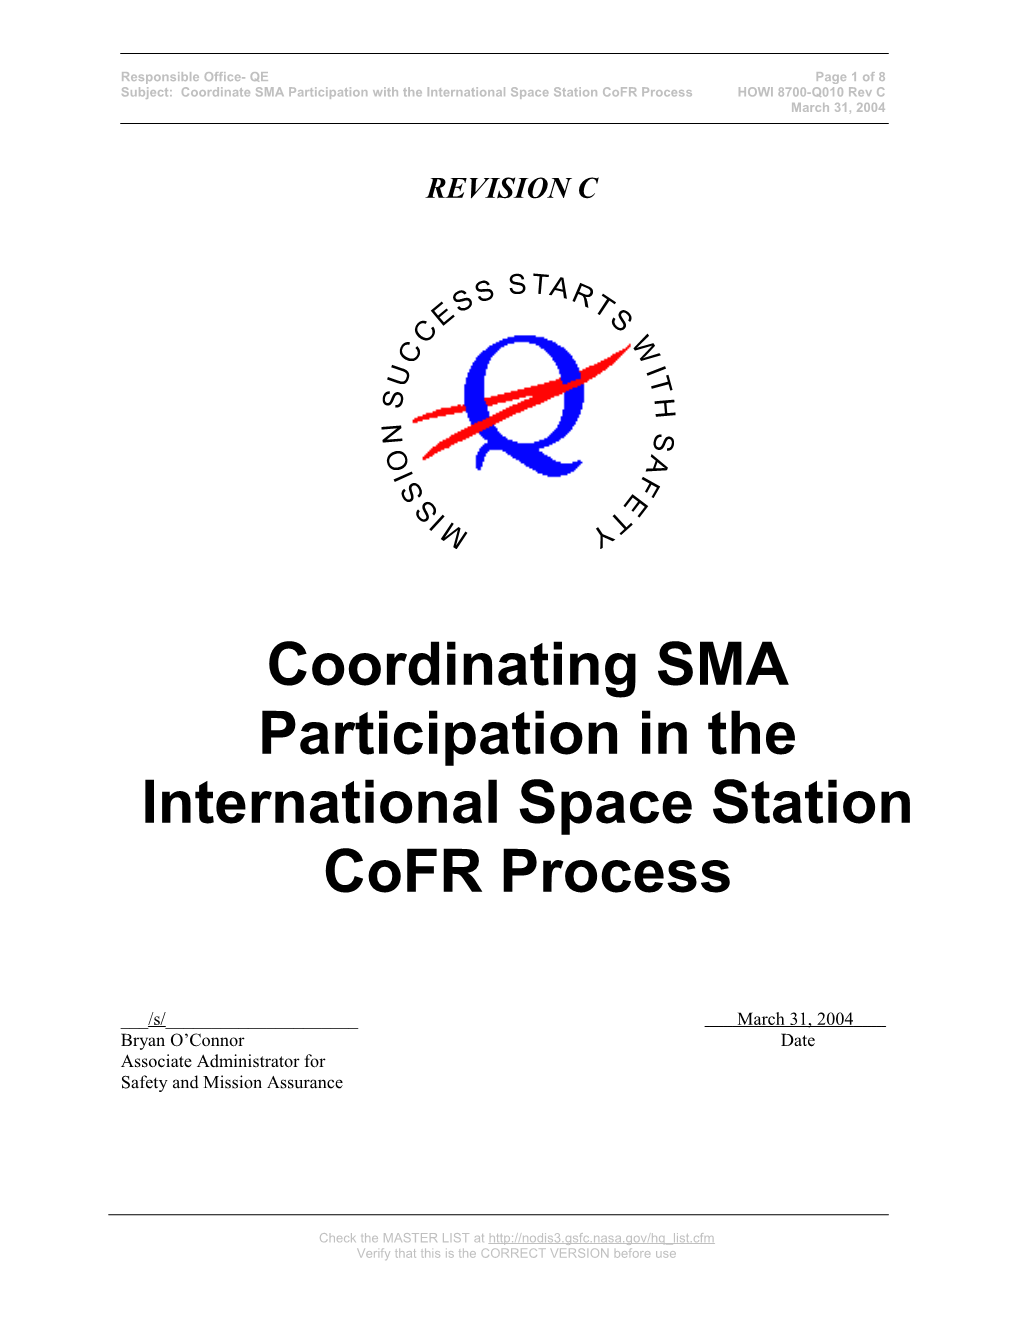 Coordinating SMA Participation in the International Space Station Cofr Process